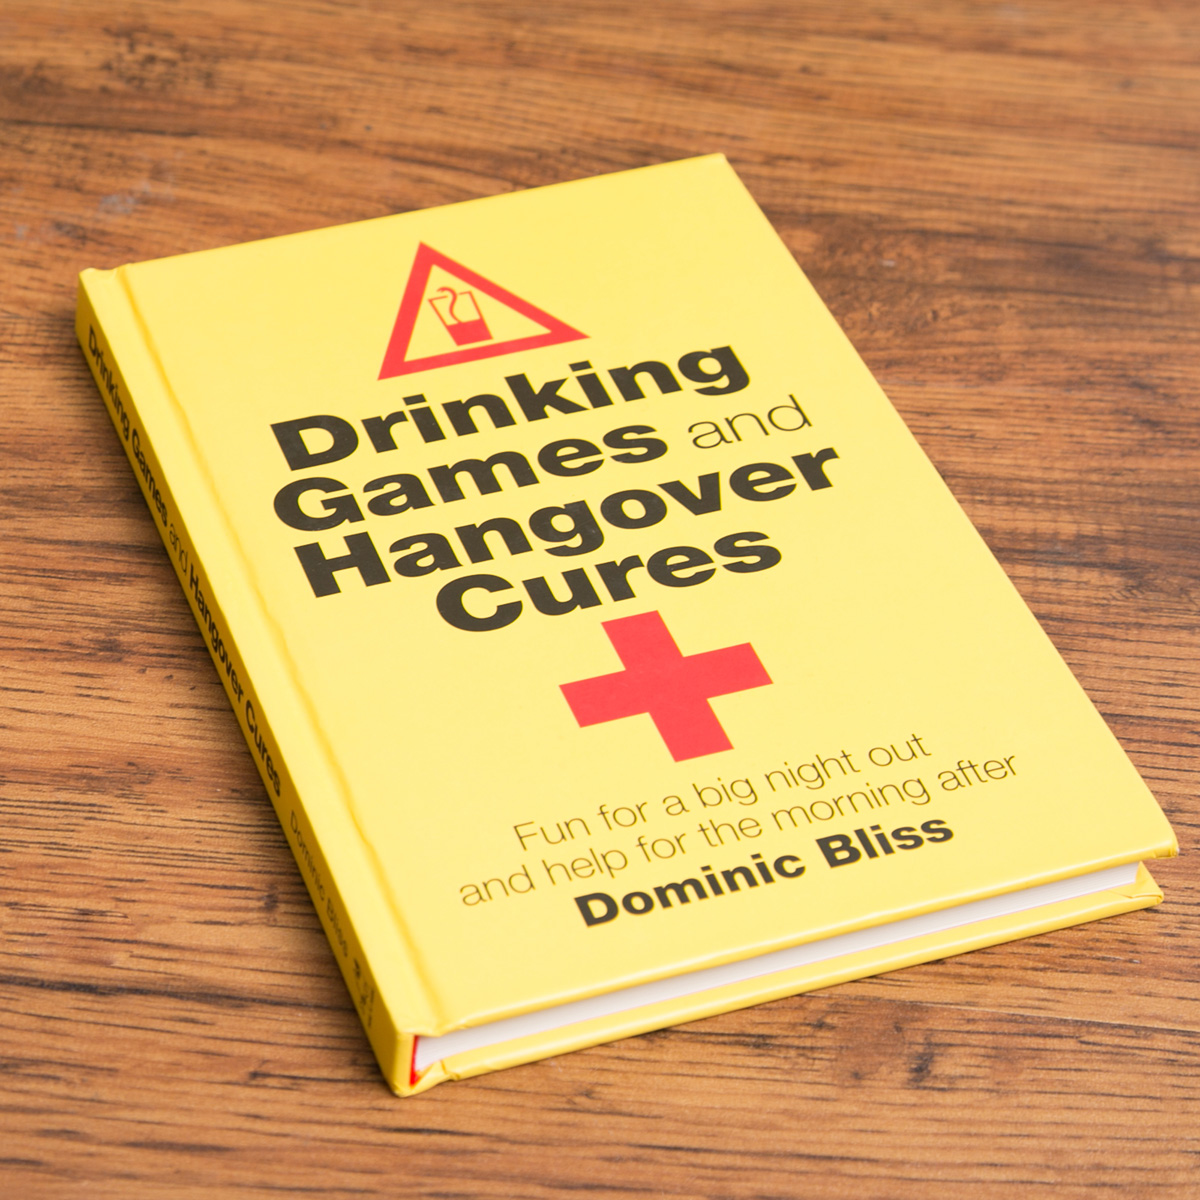 Drinking Games & Hangover Cures Book - 21st gift